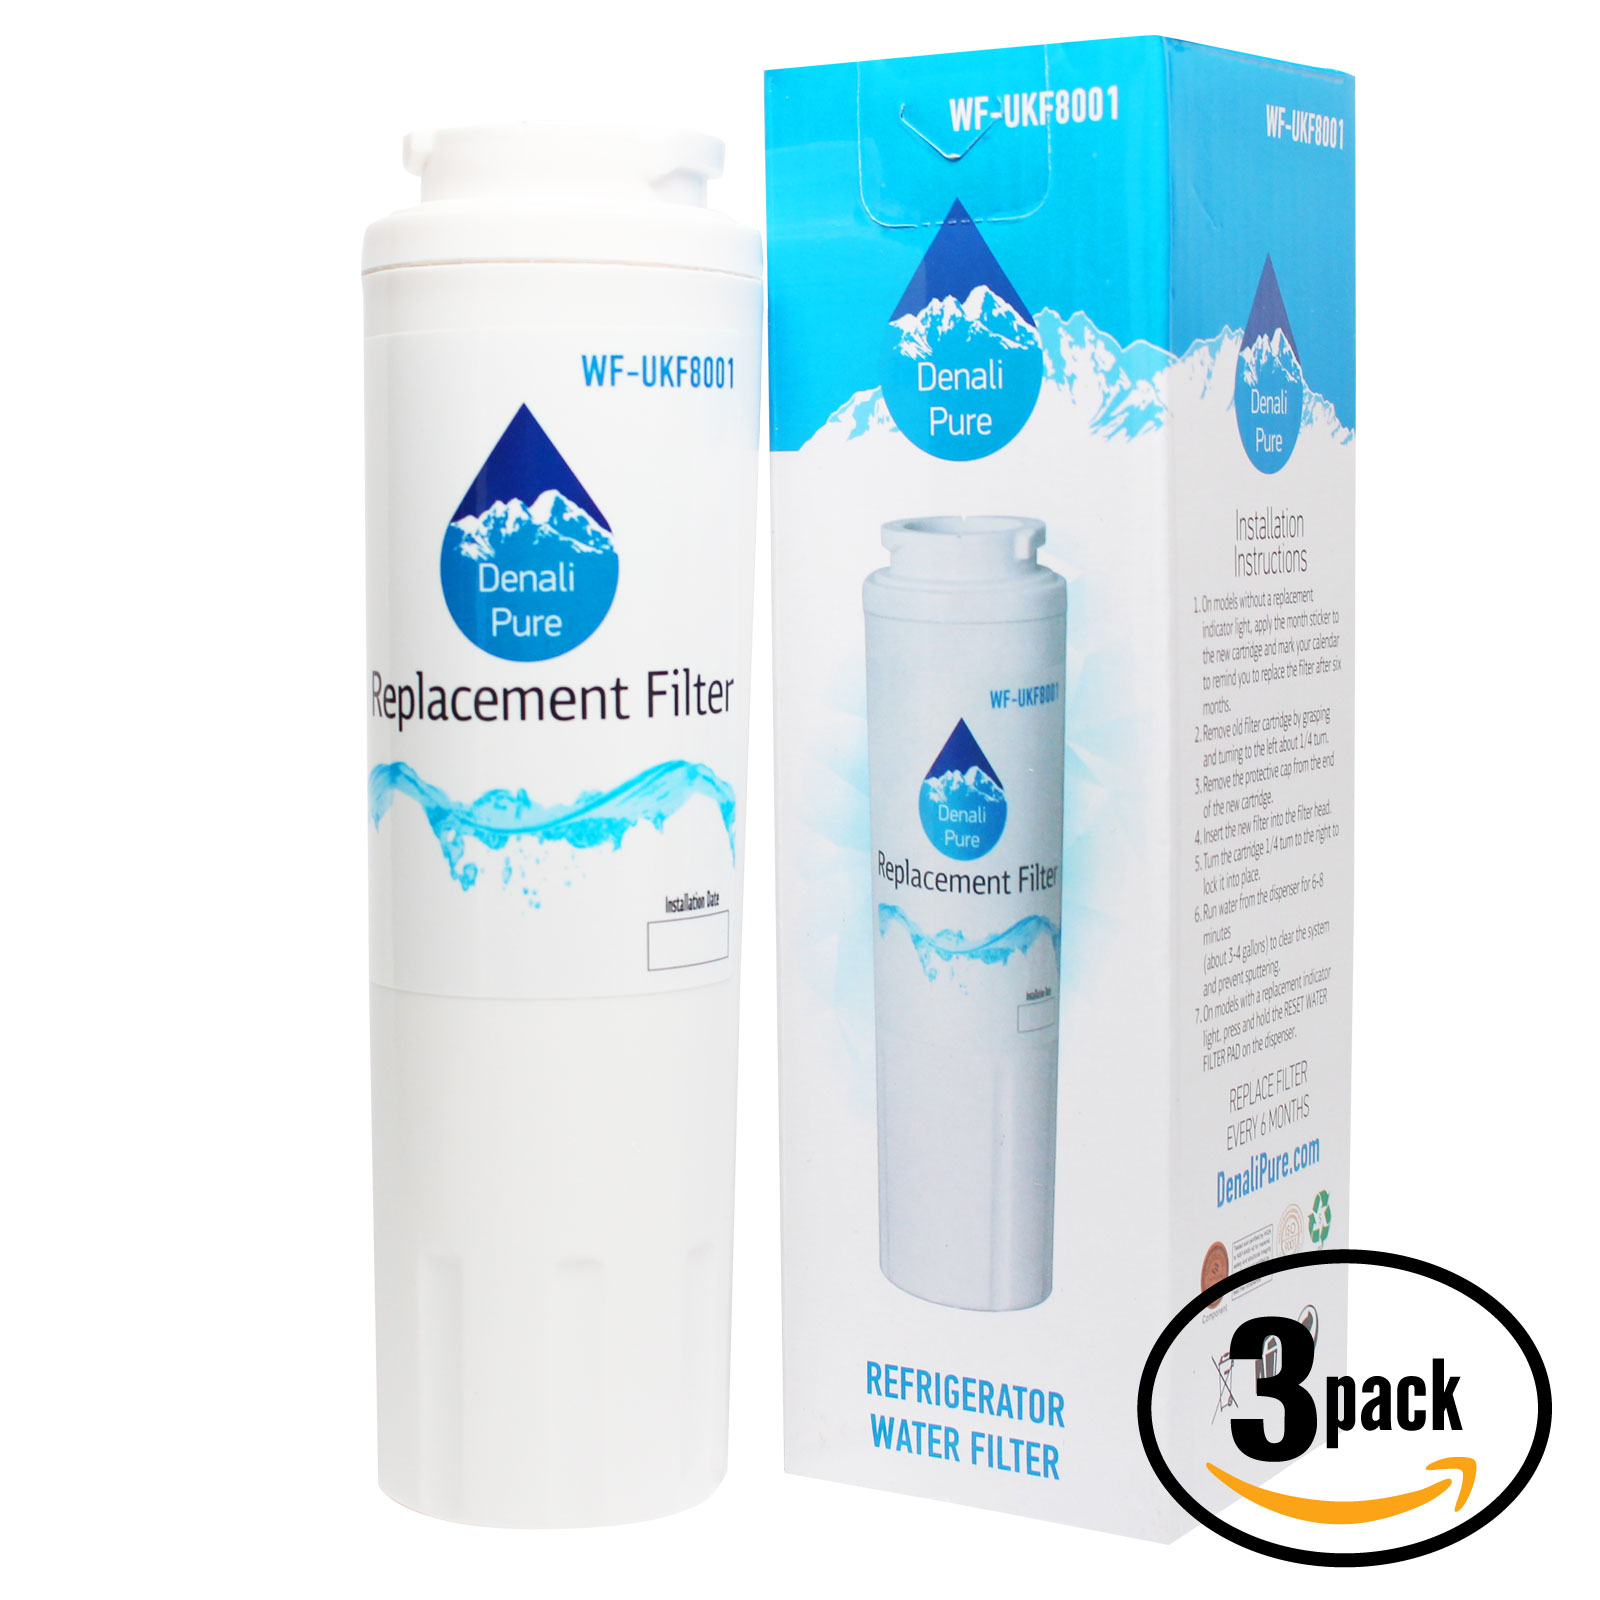 3-Pack Compatible with Whirlpool GI5FVAXVQ01 Refrigerator Water Filter - Compatible with Whirlpool 4396395 Fridge Water Filter Cartridge - image 1 of 4